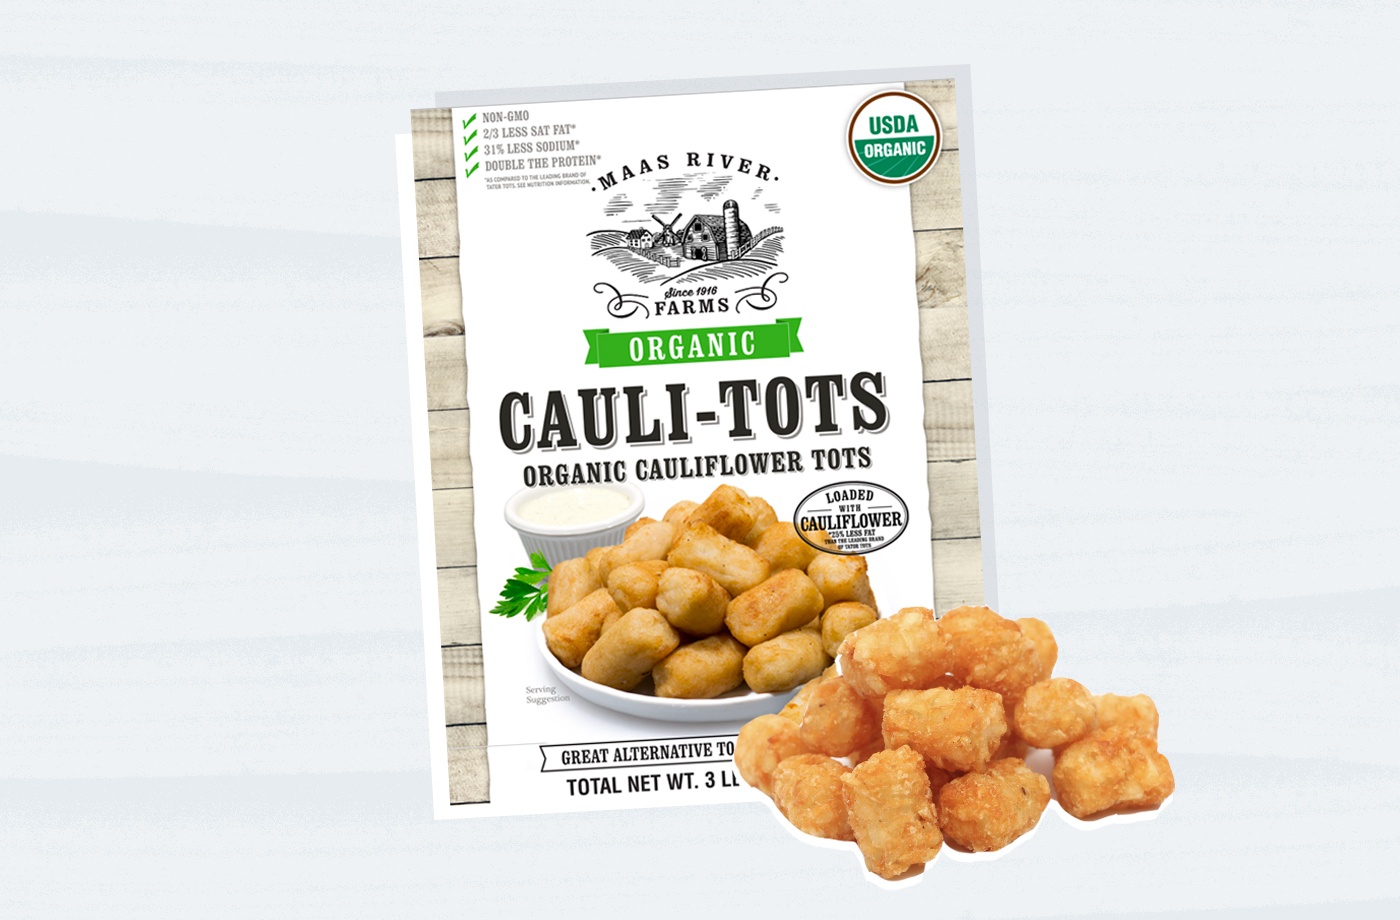 Coscto has now jumped on the cauliflower tots bandwagon and I’m here for it